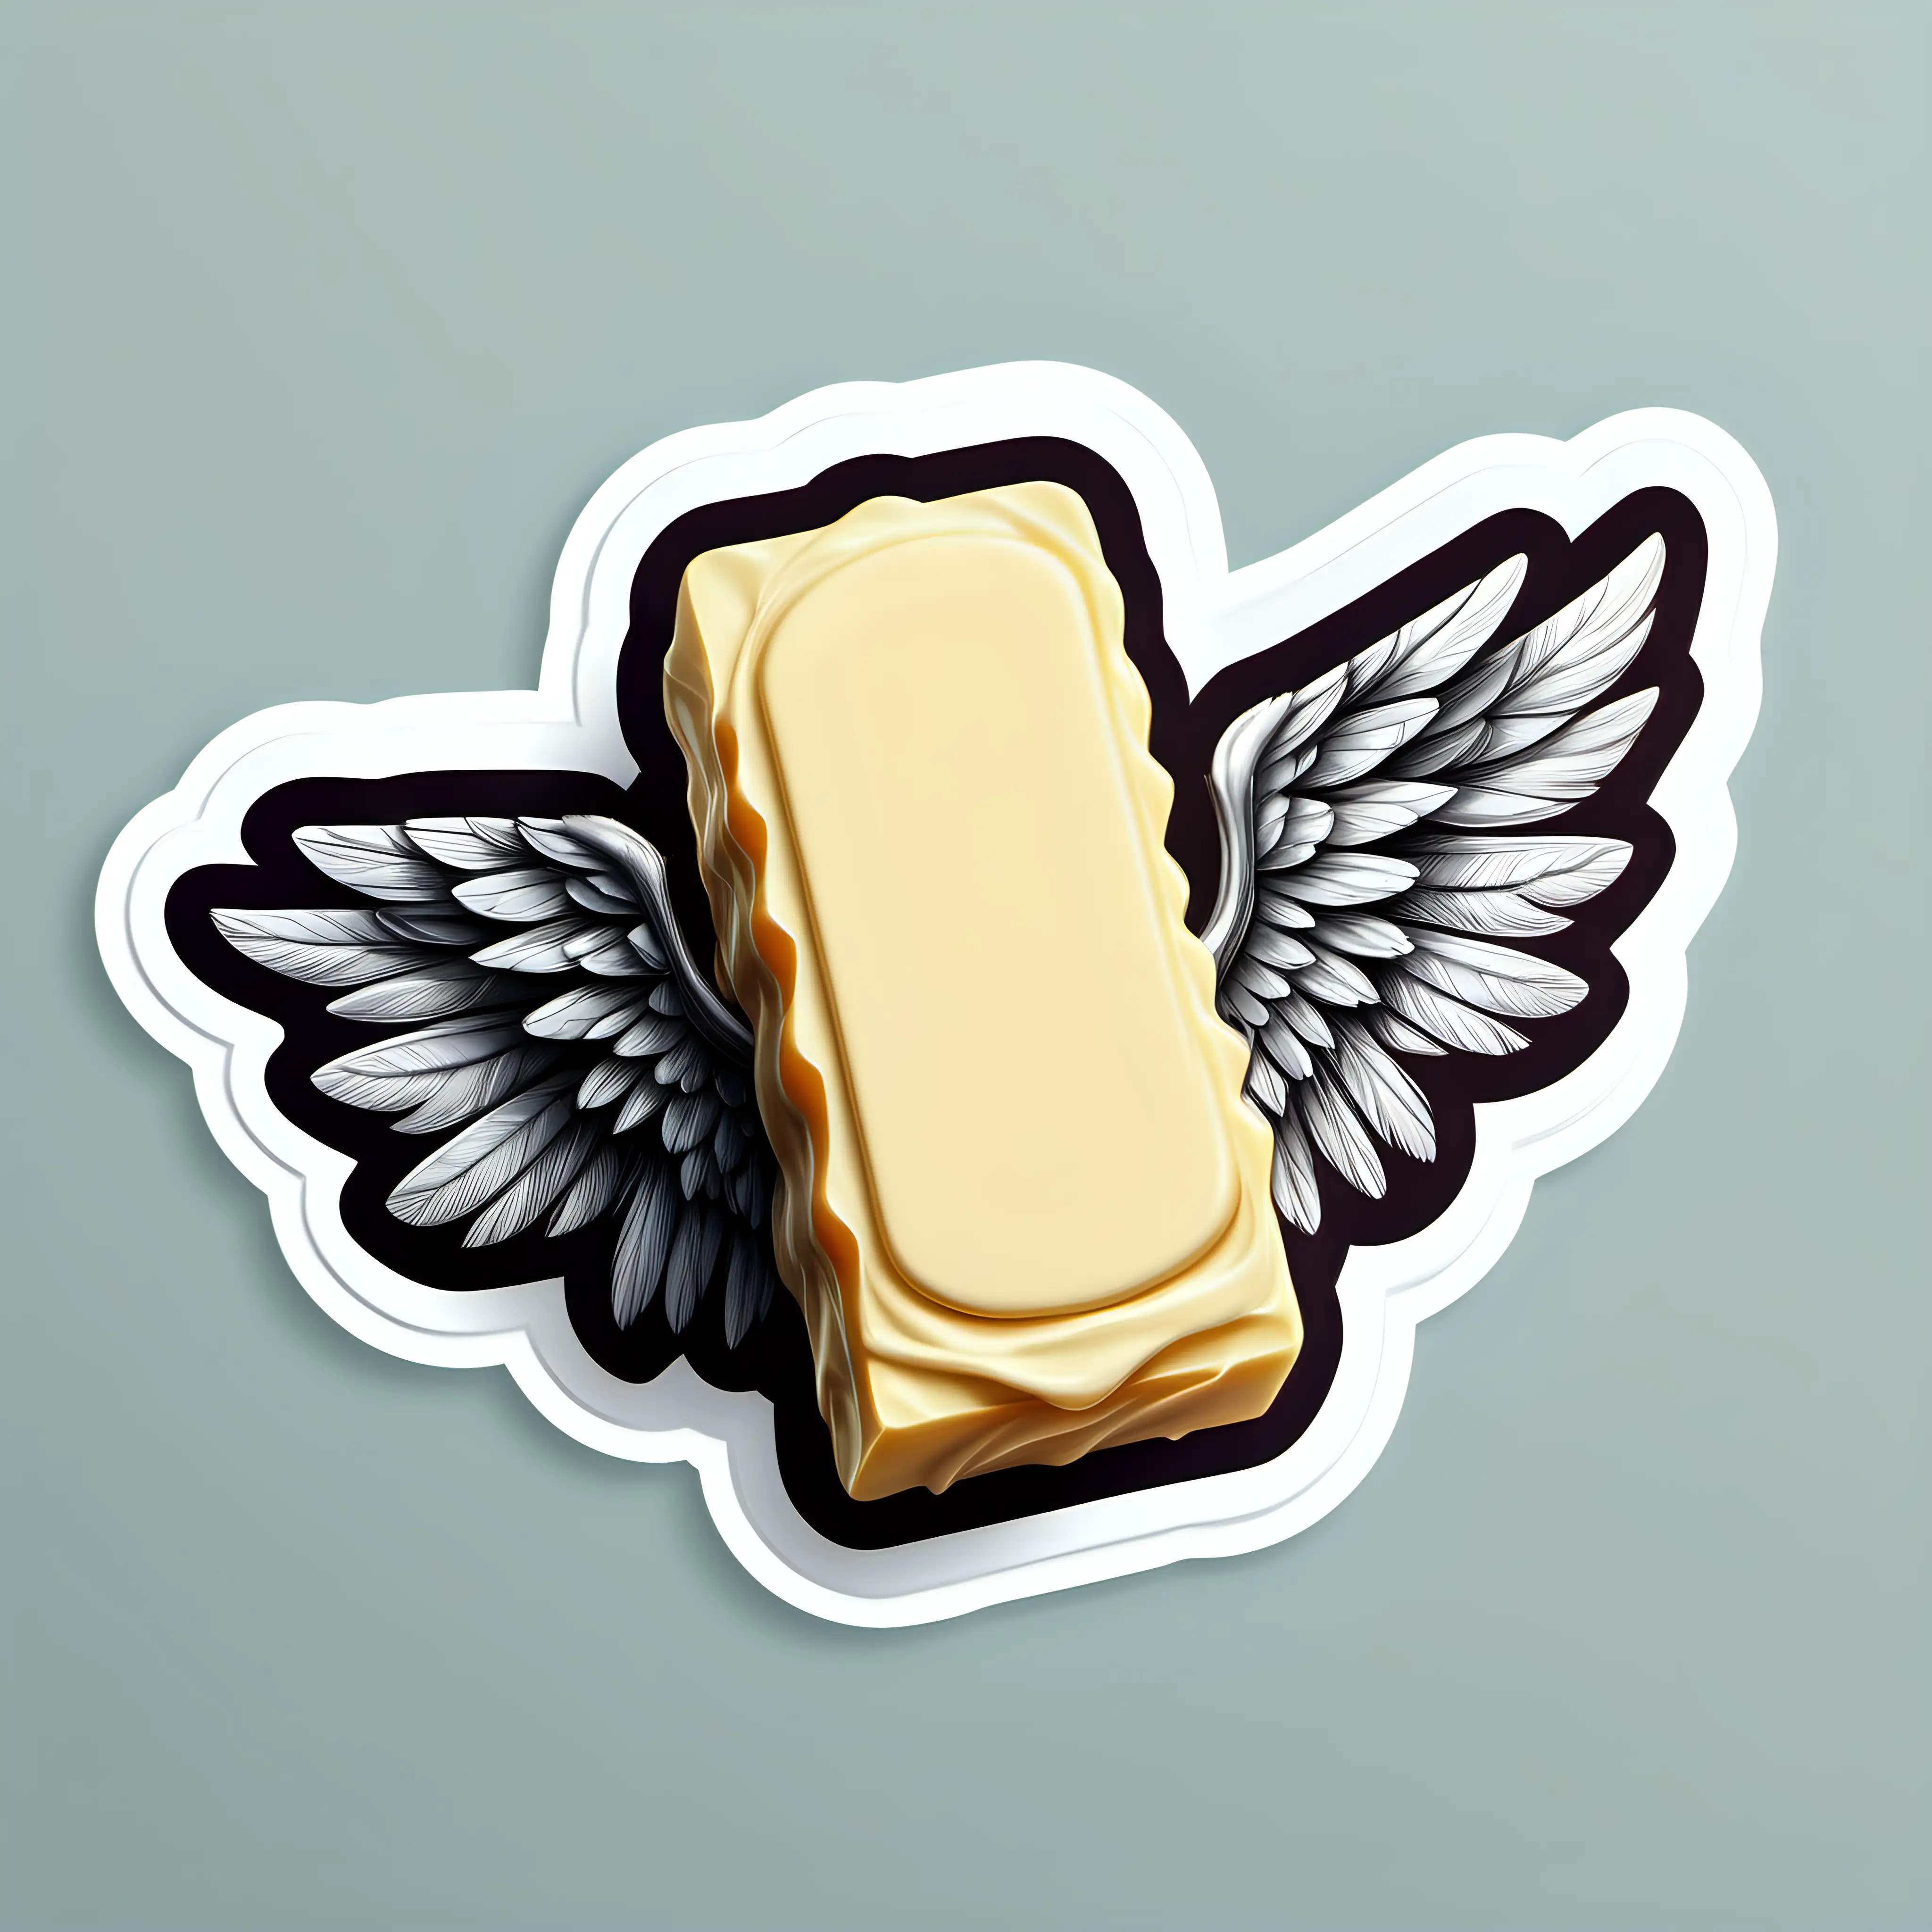 Hyper realistic butter with wings, sticker style